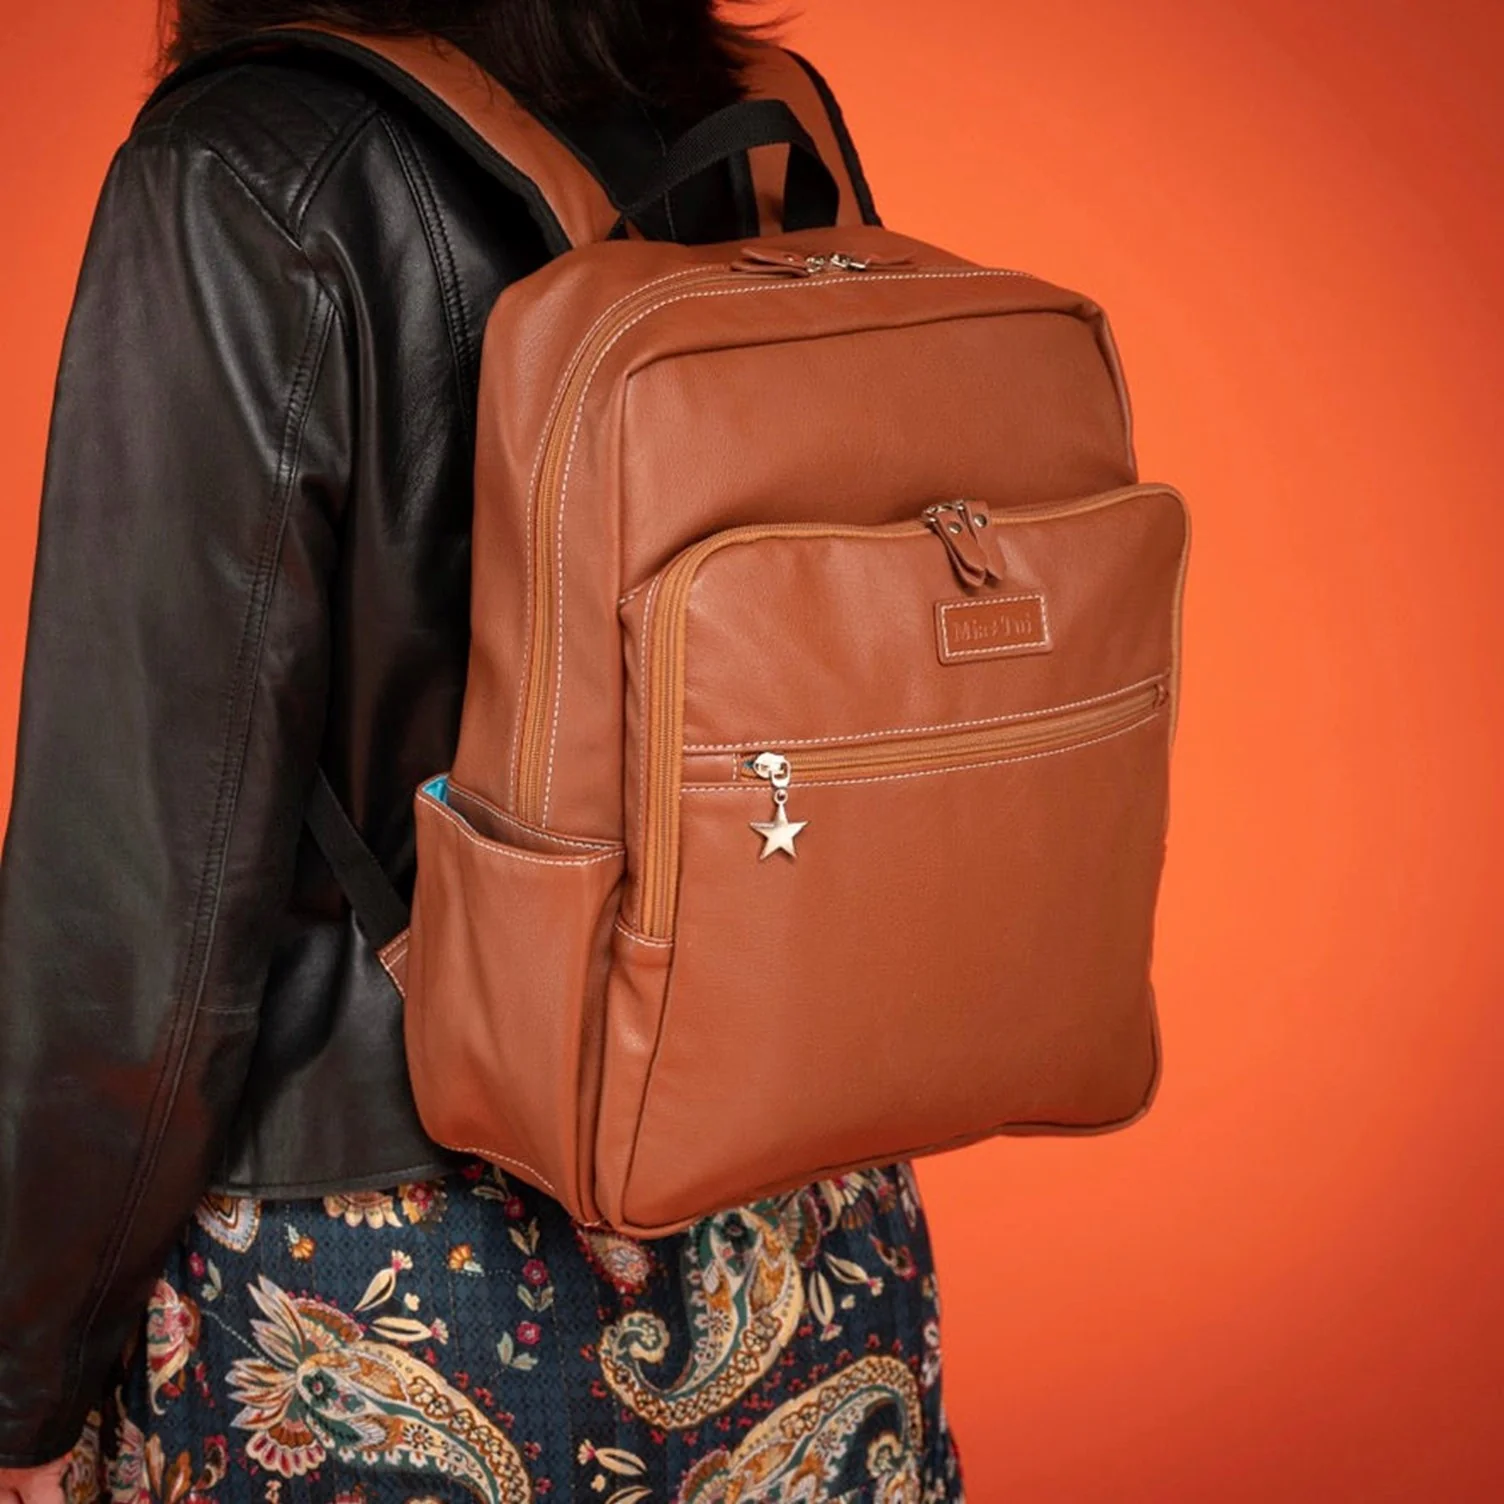 Mia Tui Bags A Fusion of Style, Functionality, and Sustainability